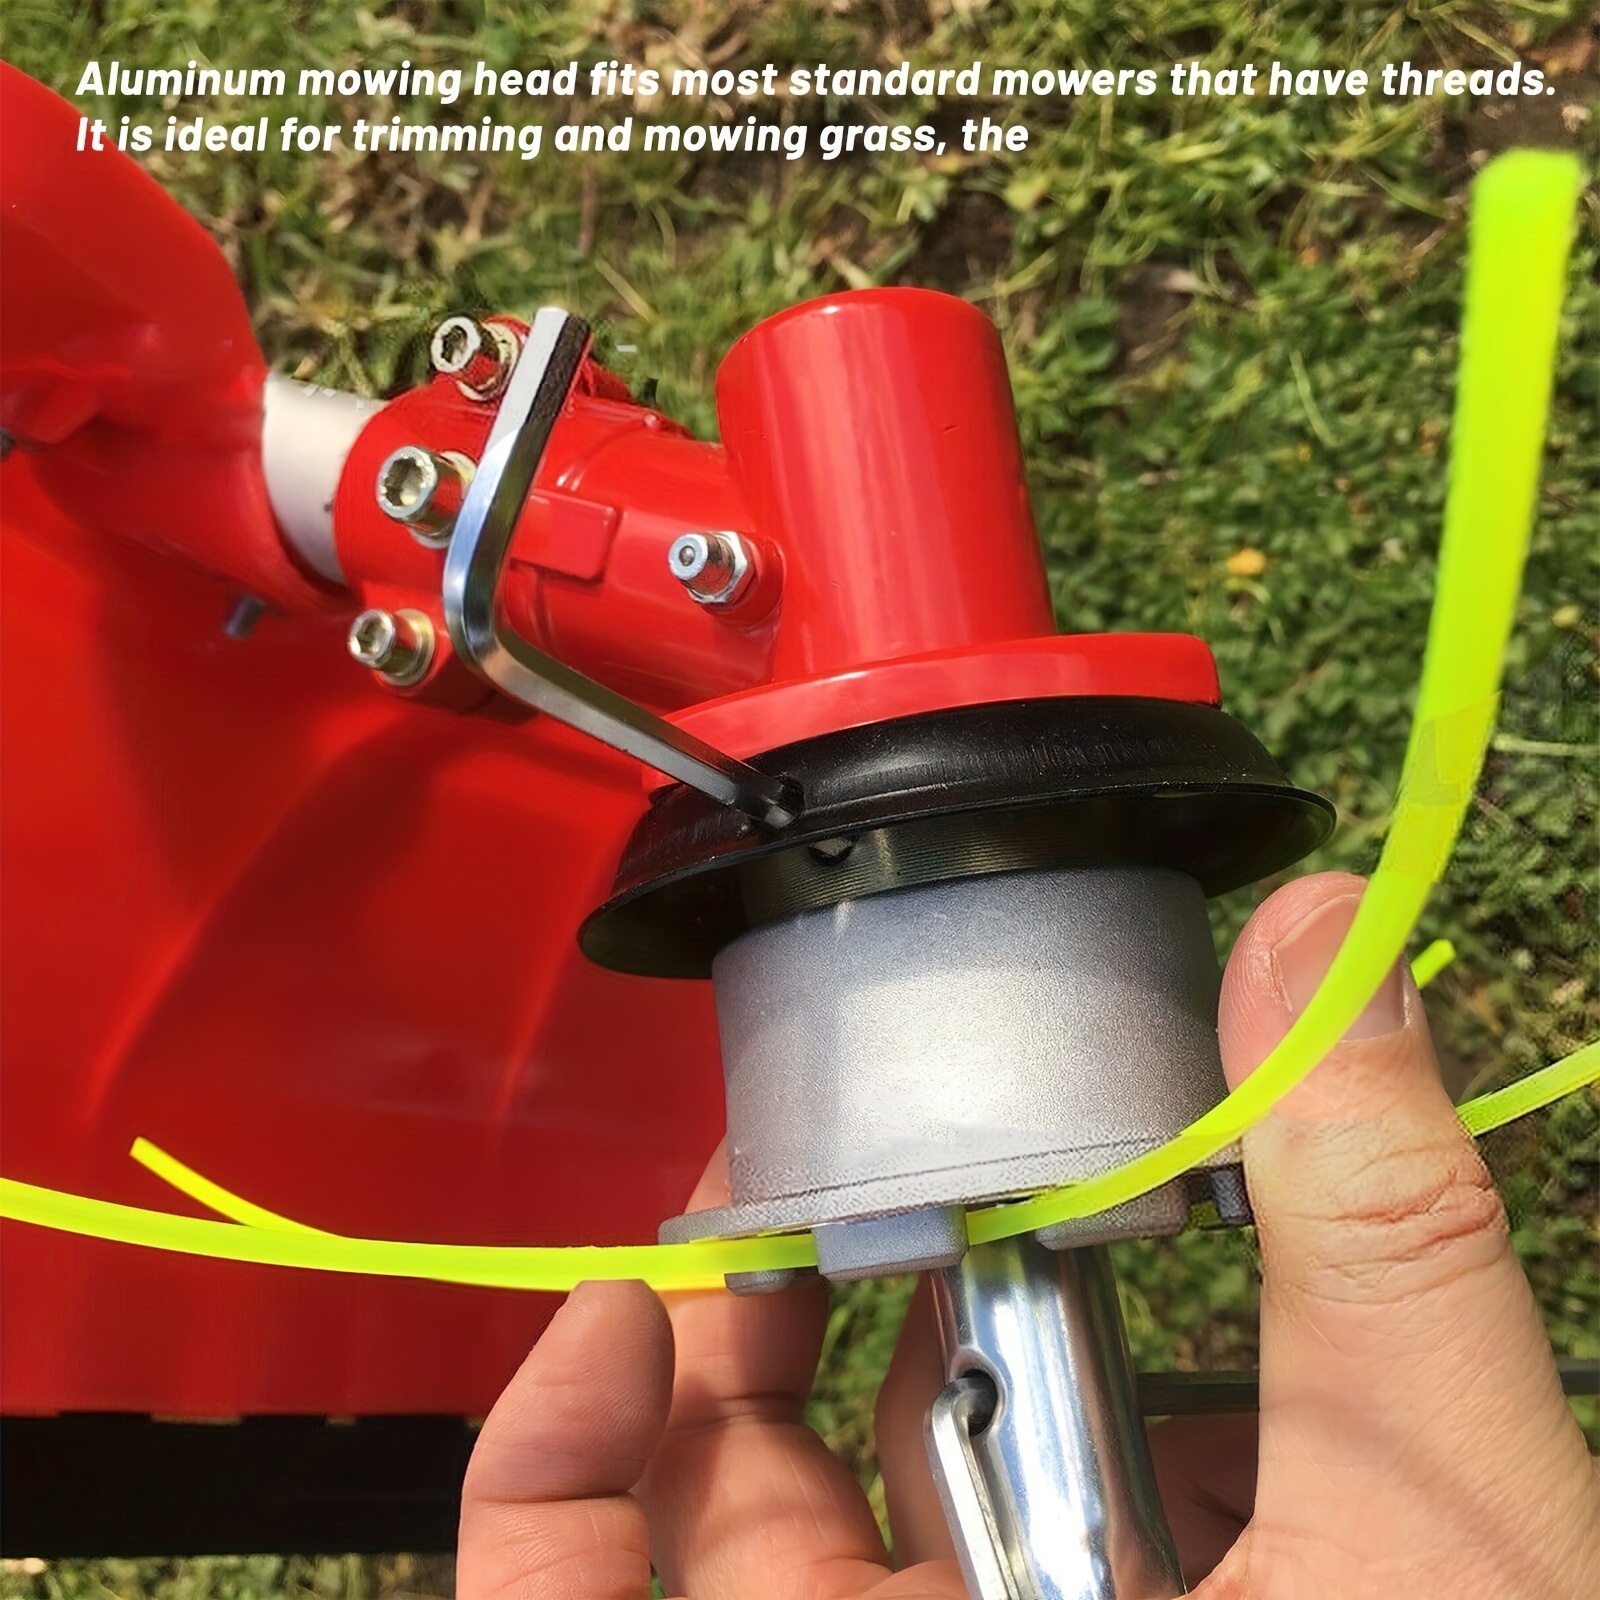 

Universal Lawn Trimmer Head Double Line Head For Brush Cutter Aluminium Grass Mowing Head Aluminium Mowing Thread Head With 4 Lines For Petrol Brush Cutter